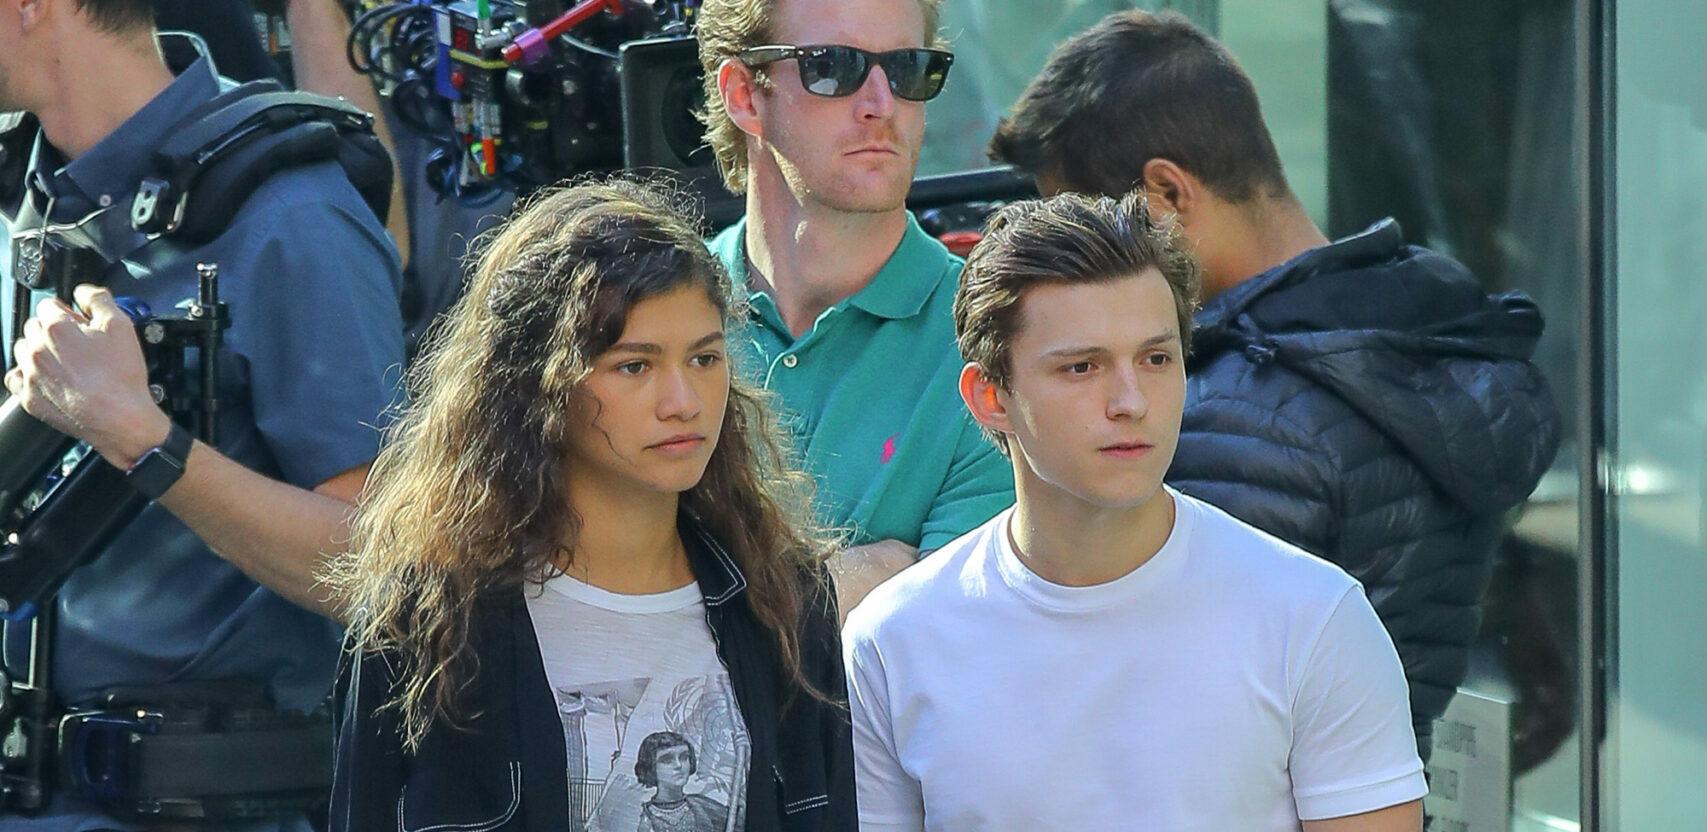 Zendaya and Tom Holland seen on break while filming Spider-Man Far From Home in New York City